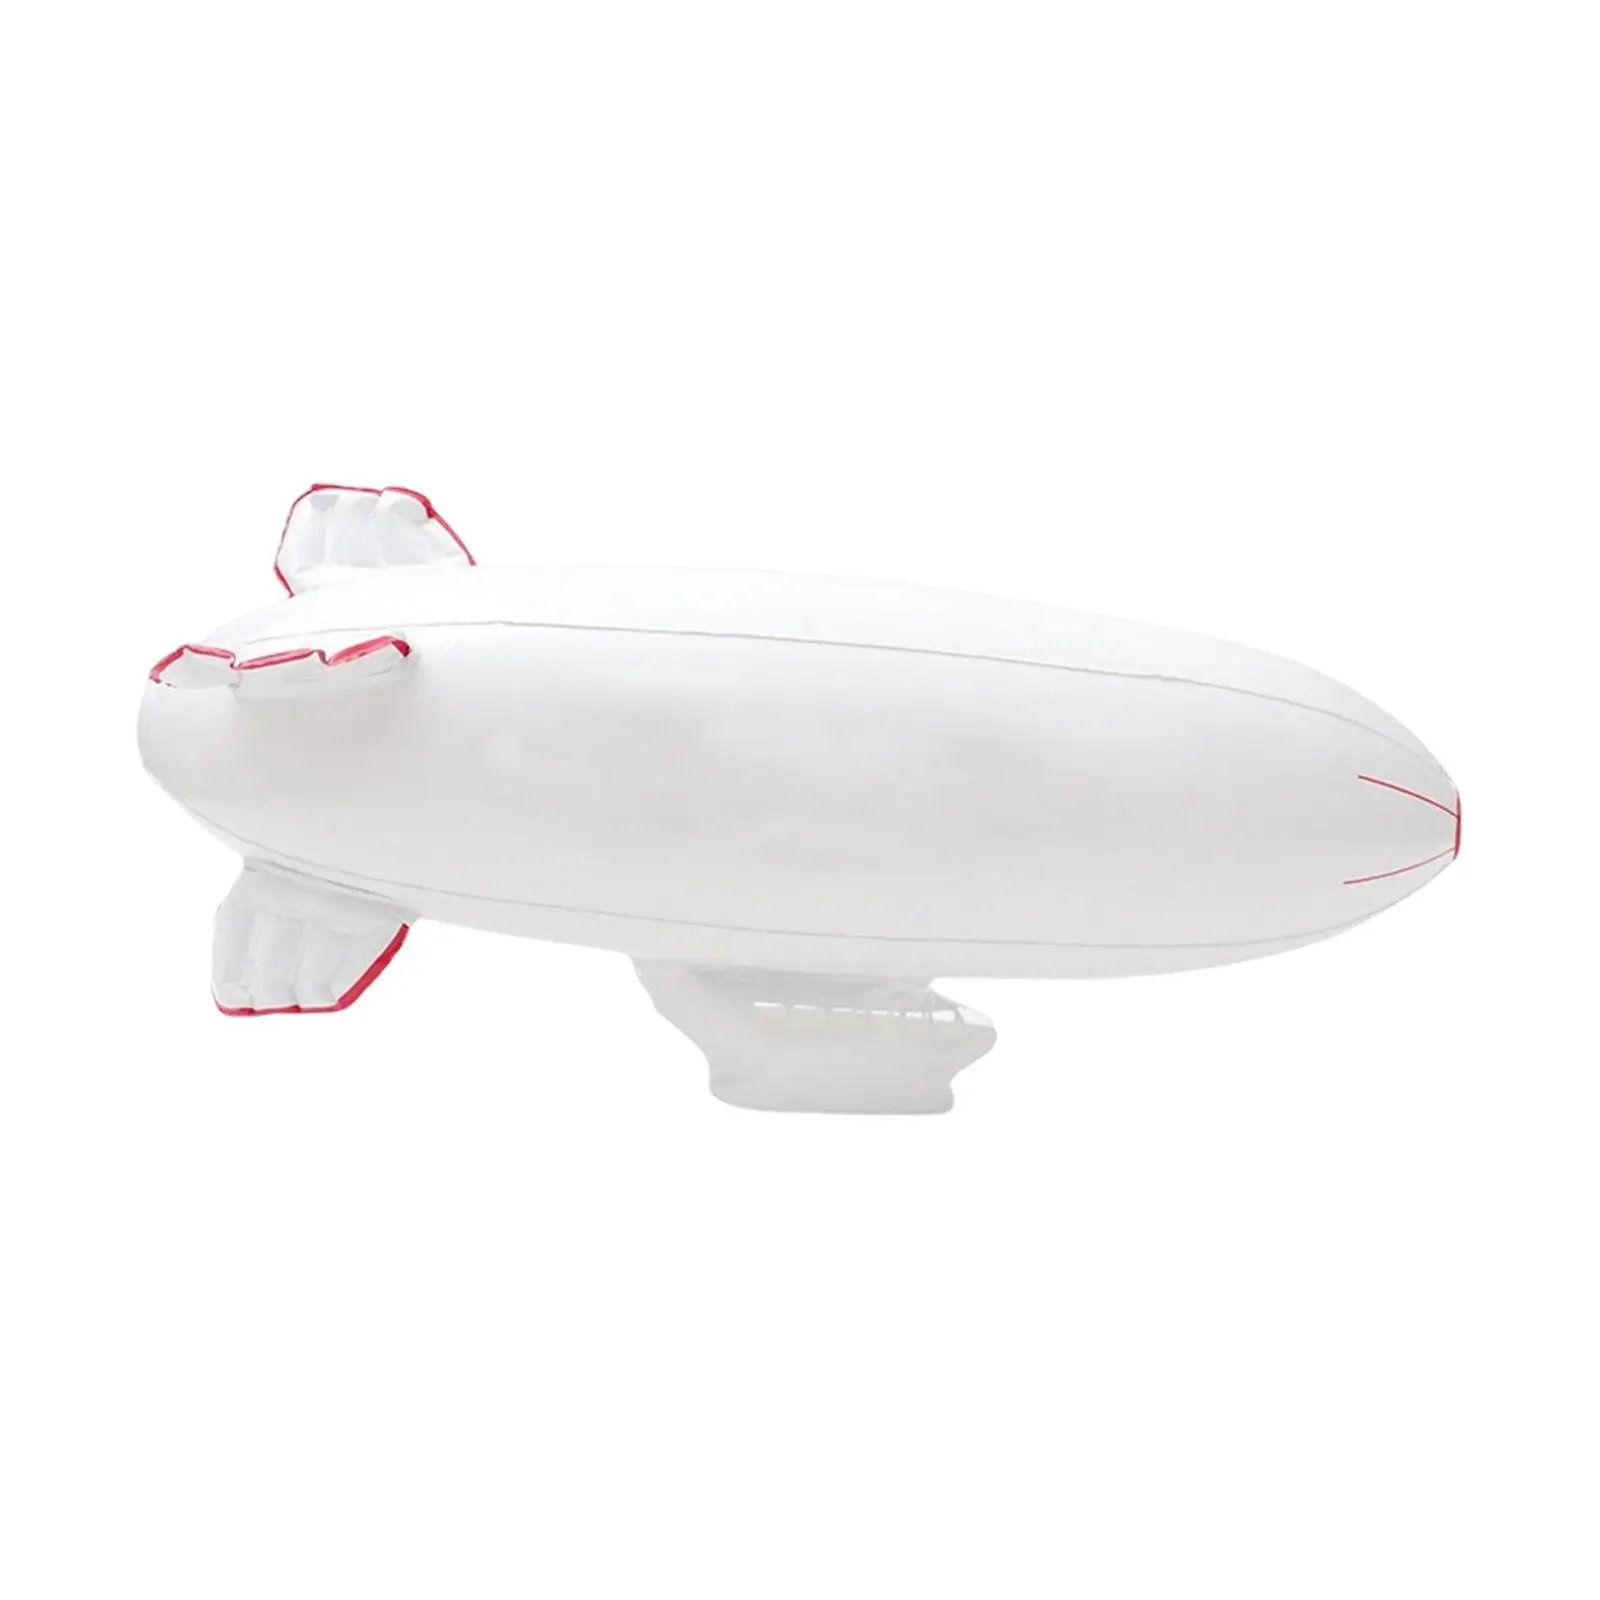 Nflatable Toy Reusable Tenacity Airplane Model for Wedding Theme Party Decor